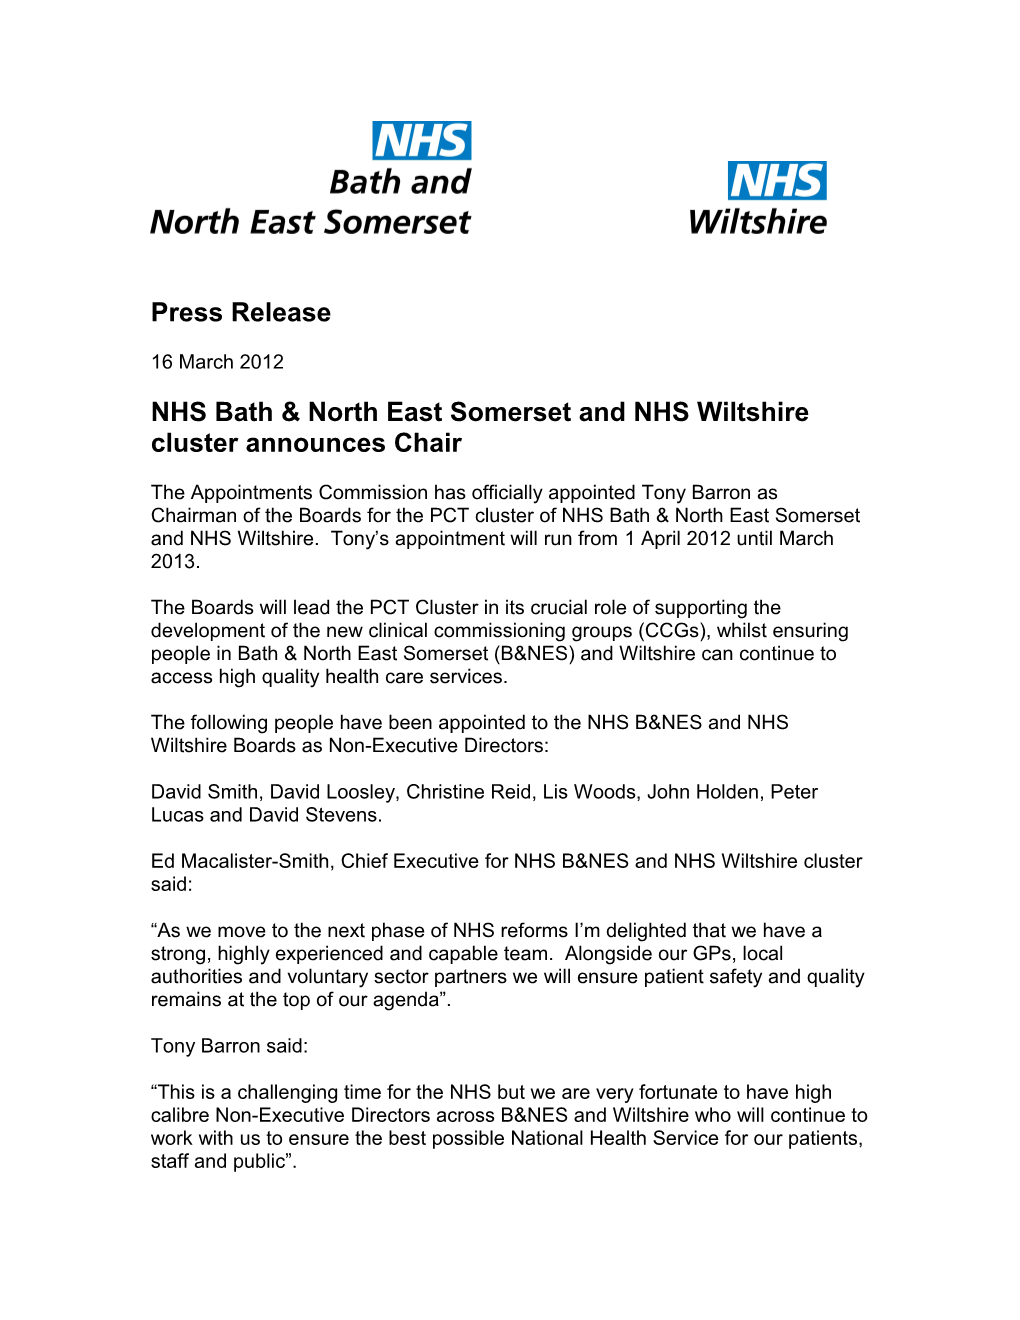 NHS Bath & North East Somerset and NHS Wiltshire Cluster Announces Chair